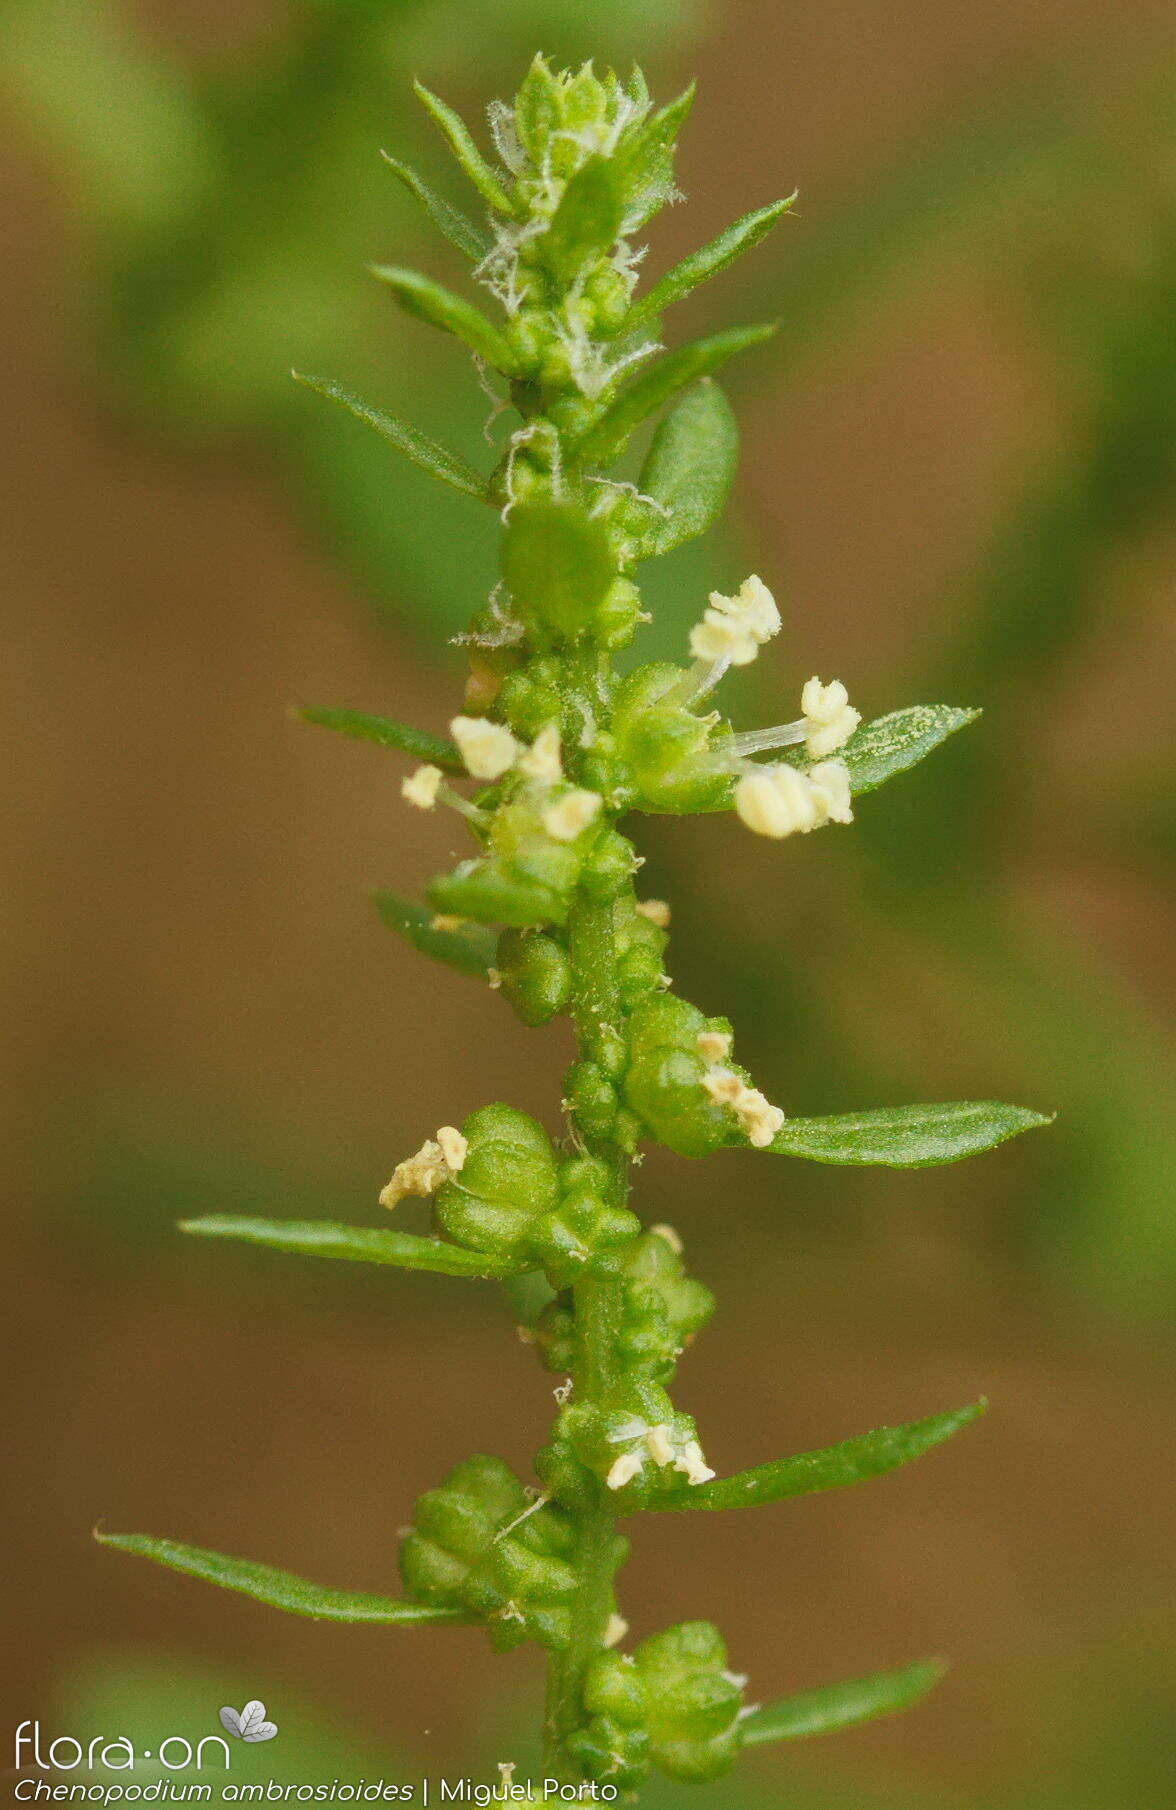 Chenopodium ambrosioides - Flor (close-up) | Miguel Porto; CC BY-NC 4.0